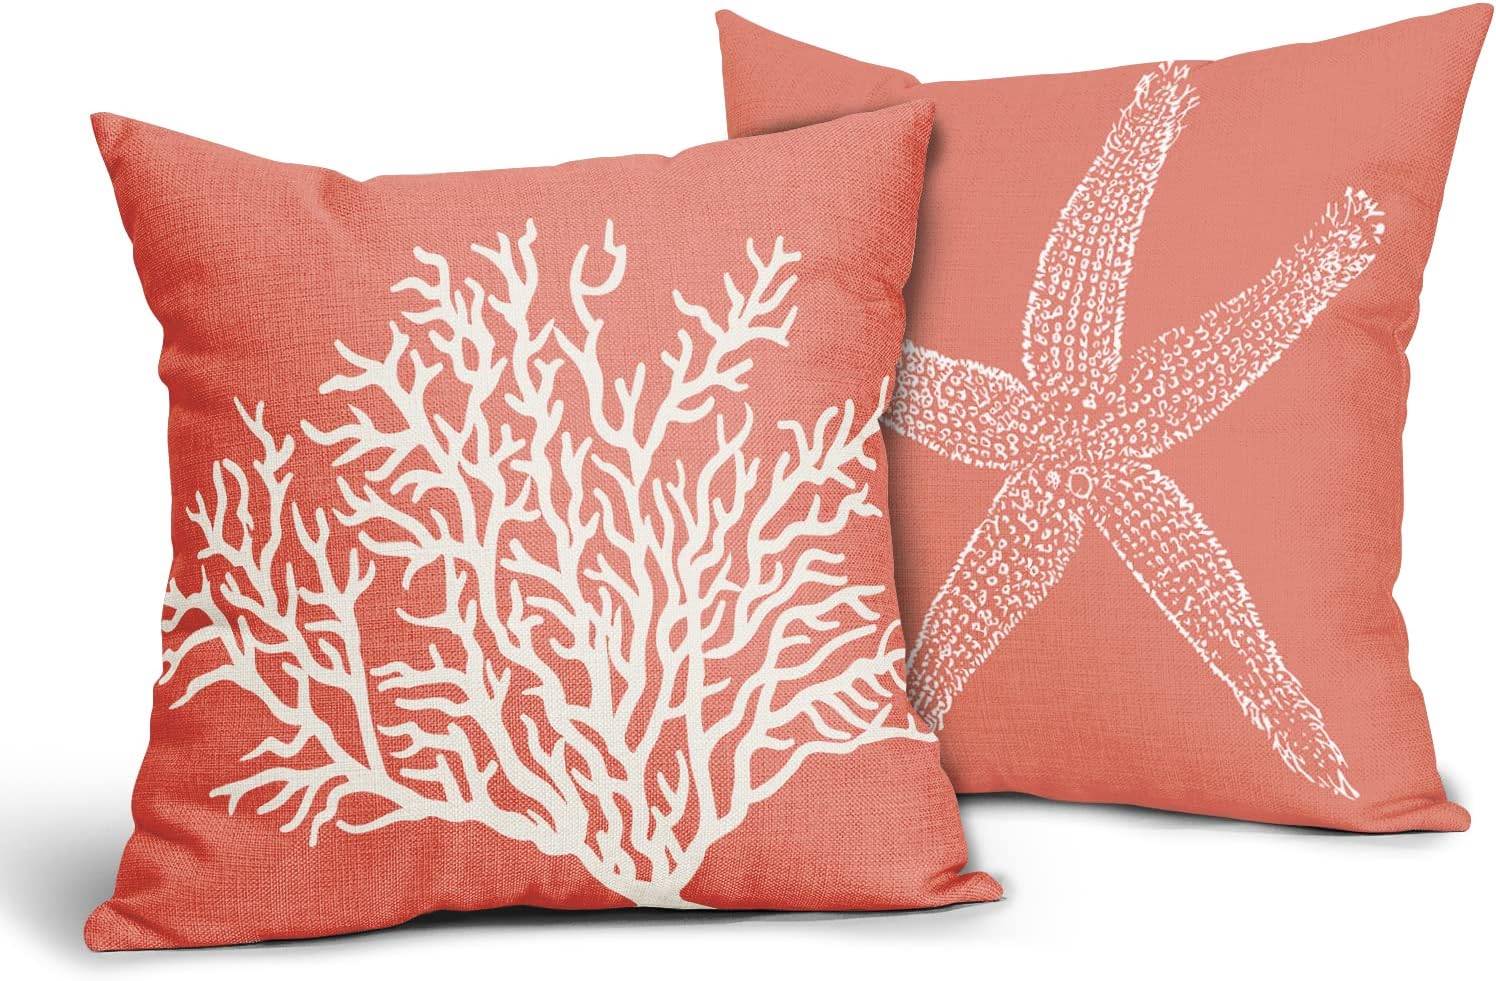 ABSOP Coastal Coral Throw Pillow Covers 16x16 Inch Set of 2 Starfish Beach Nautical Summer Farmhouse Pillowscase Linen Square Cushion for Sofa Couch Bedroom Living Room Home Decoration